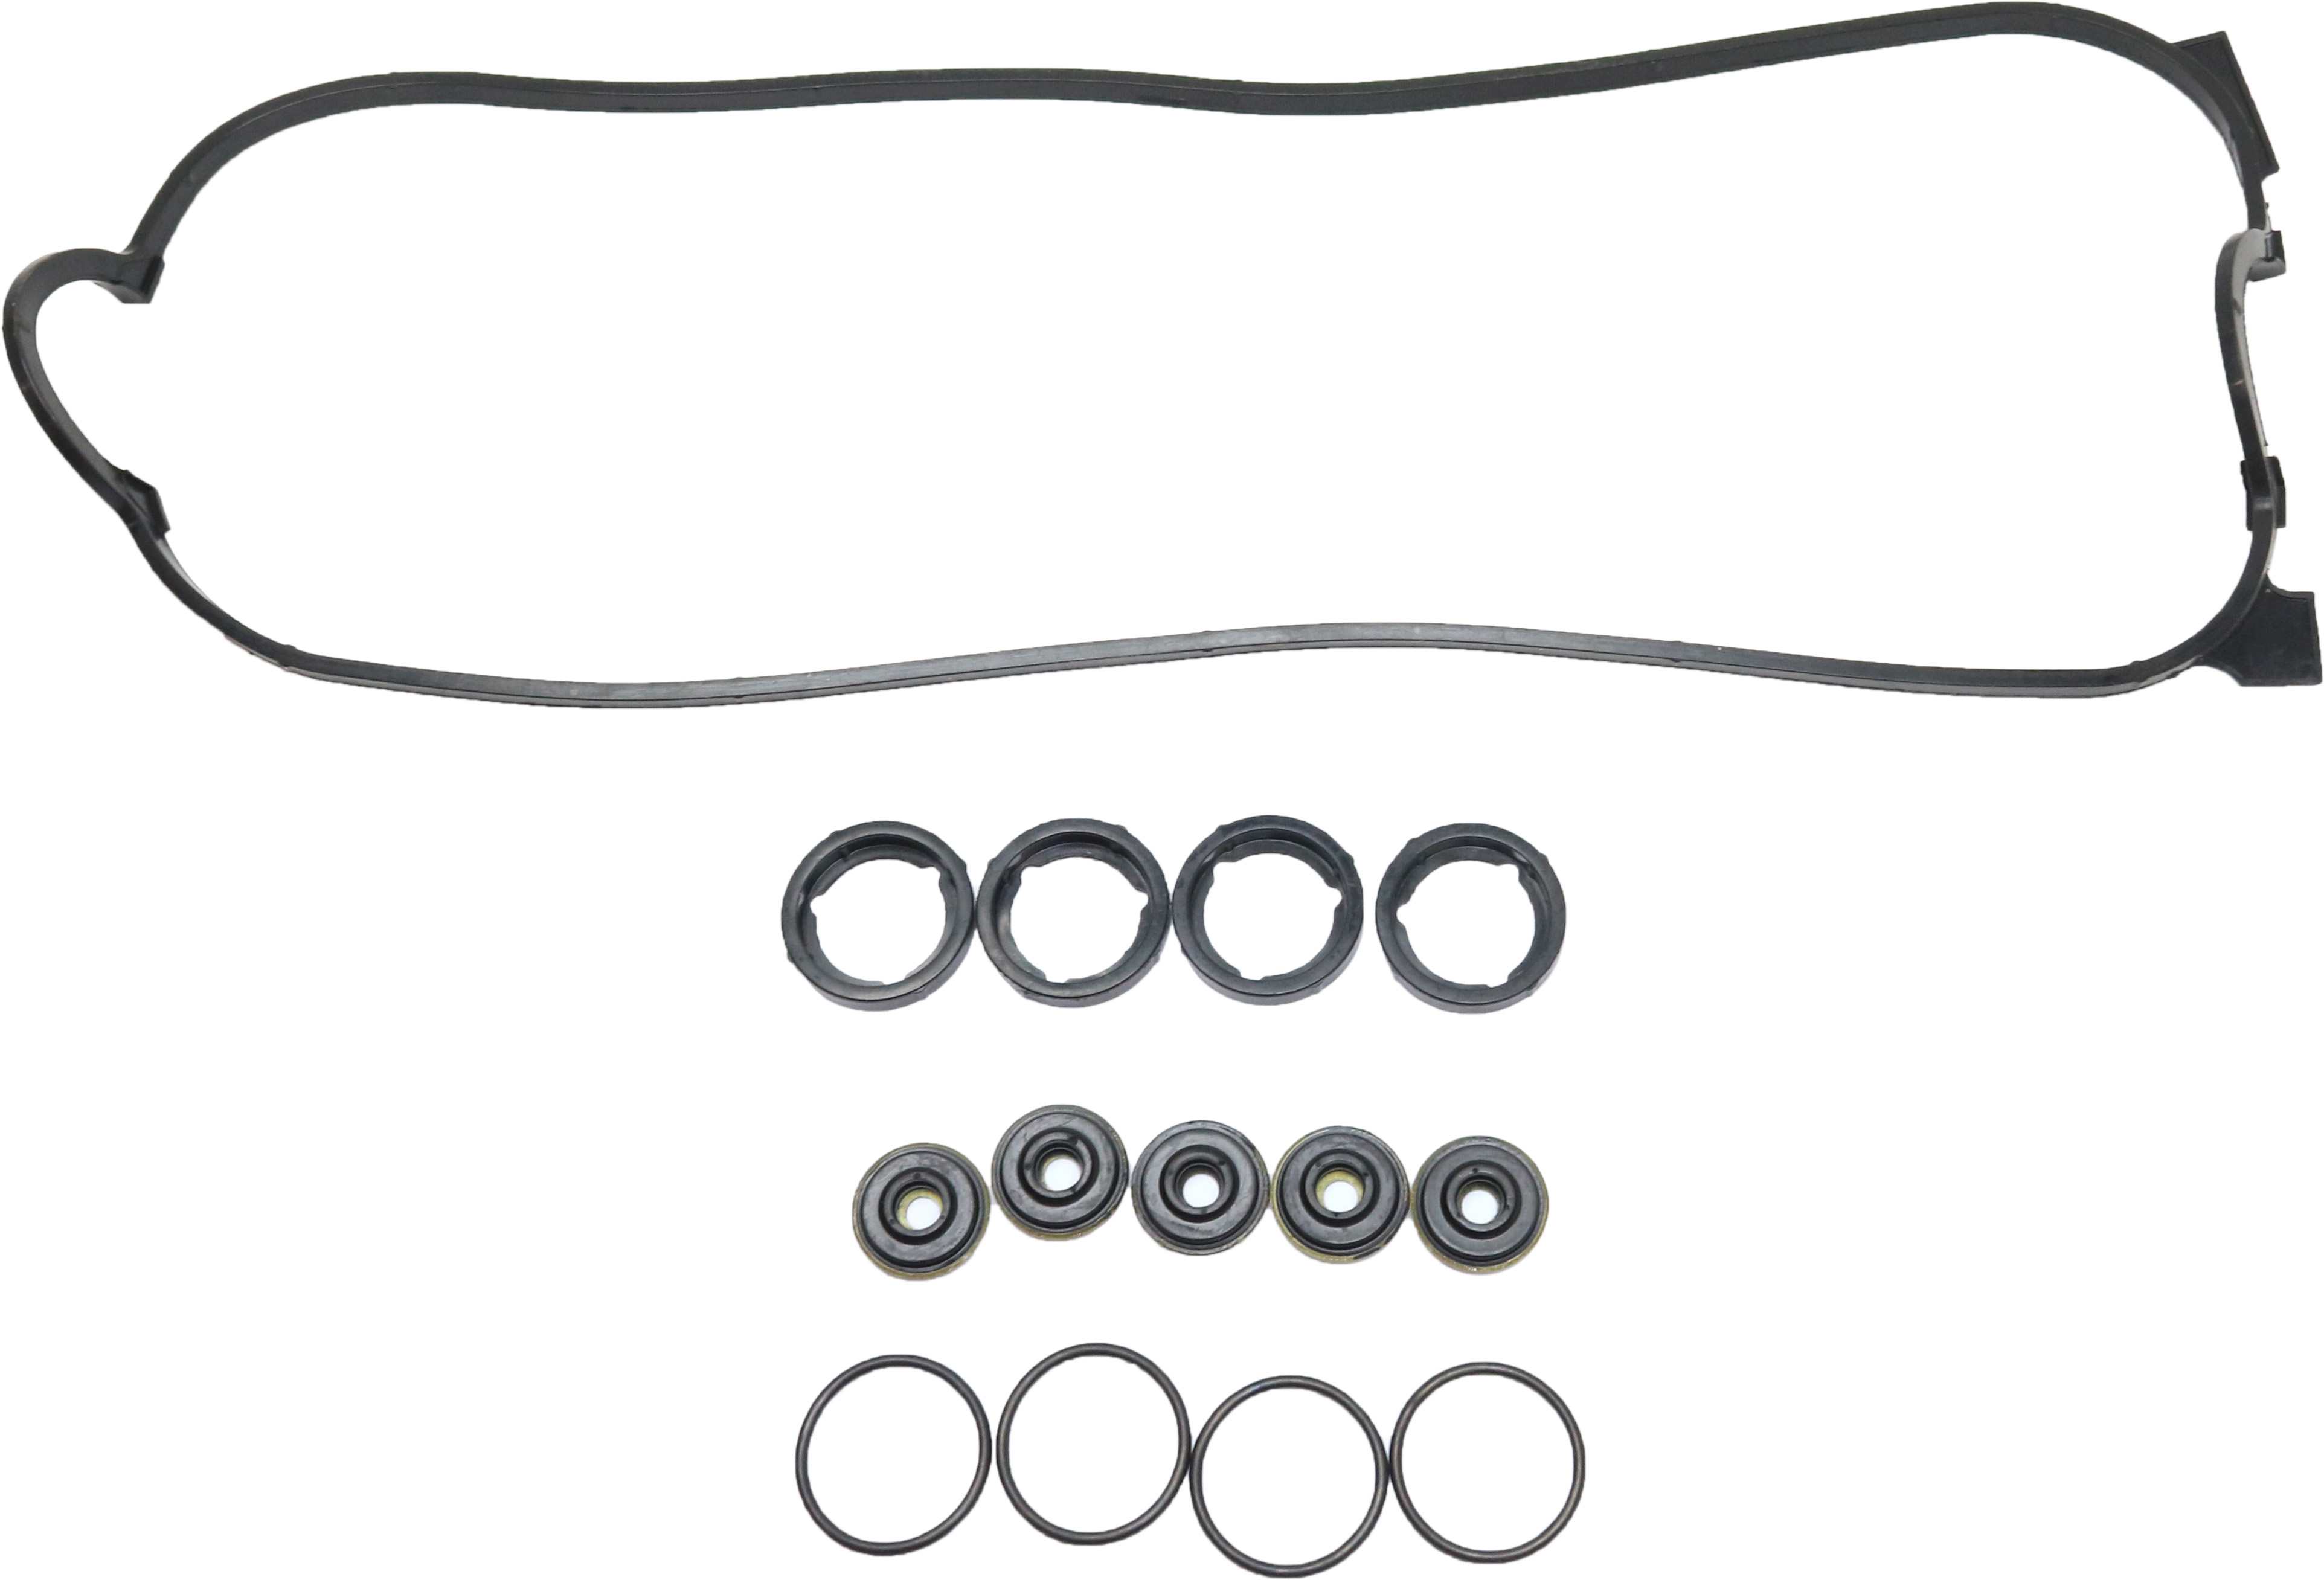 Valve Cover Gasket Compatible with 1990-1997 Honda Accord 1996-1997 Isuzu  Oasis 4Cyl 2.2L